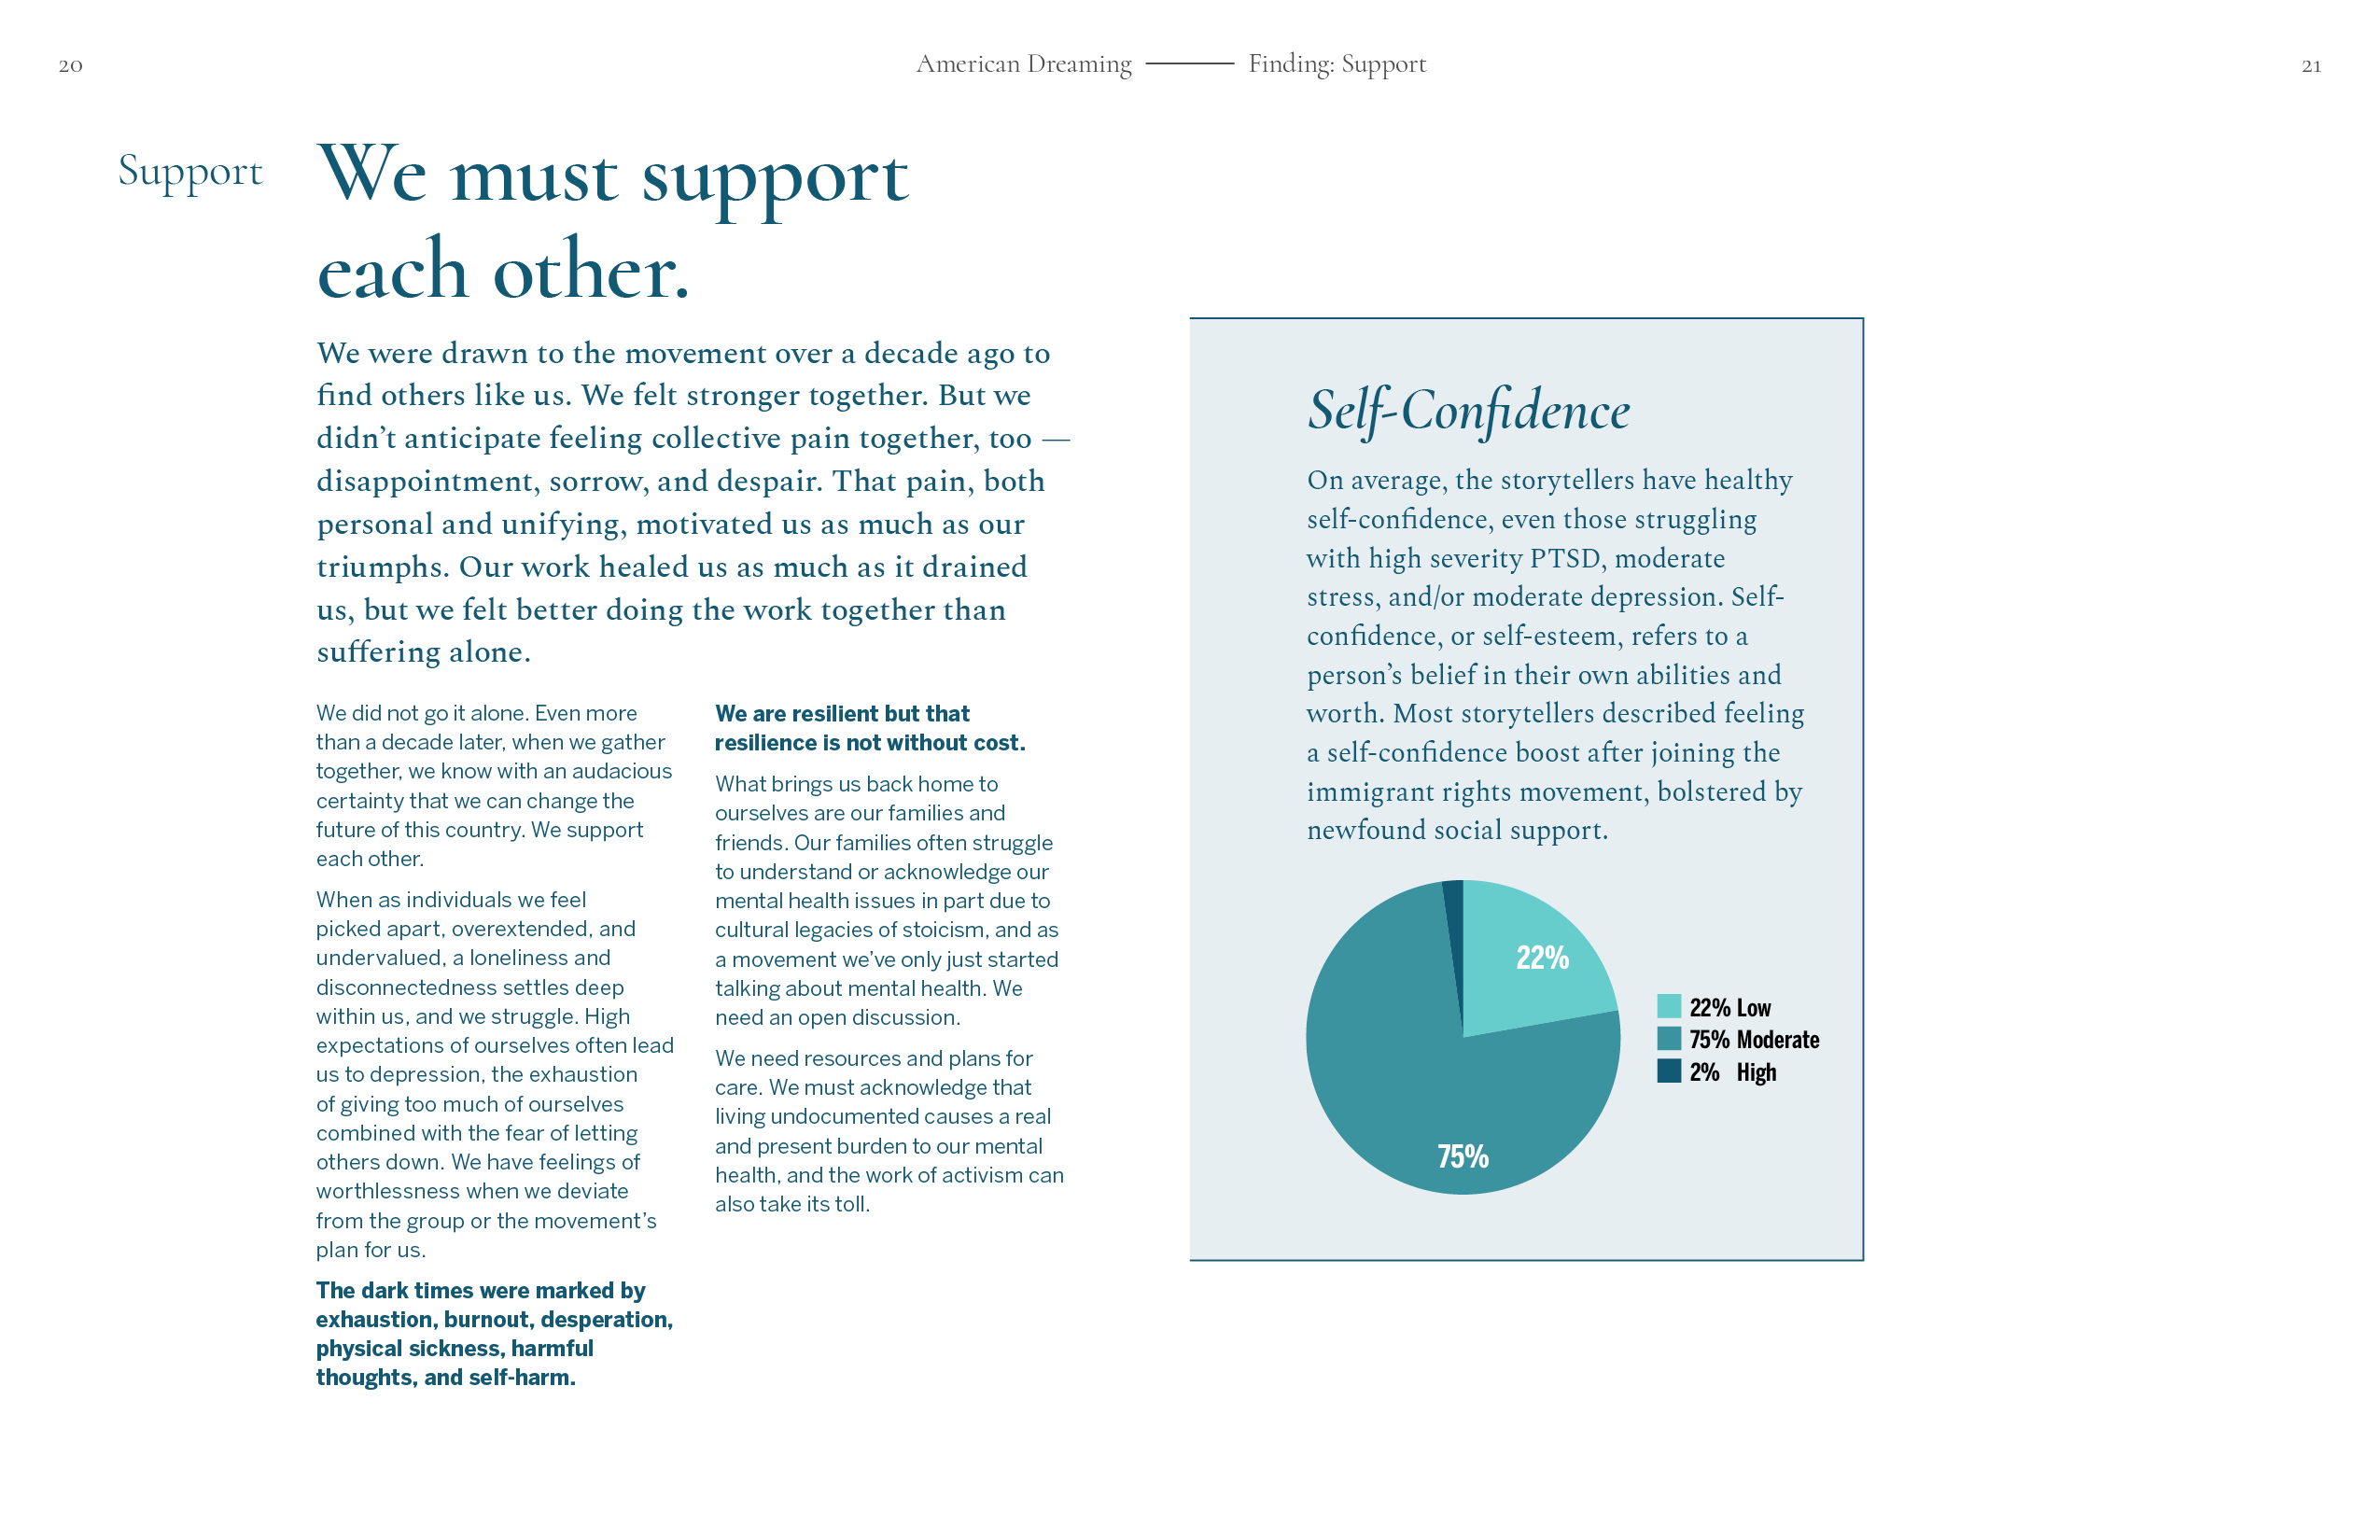 A typographic spread of the report, elaborating on Support: We must support each other and a pie chart showing the self-confidence of the storytellers (22% low, 75% moderate, 2% high).